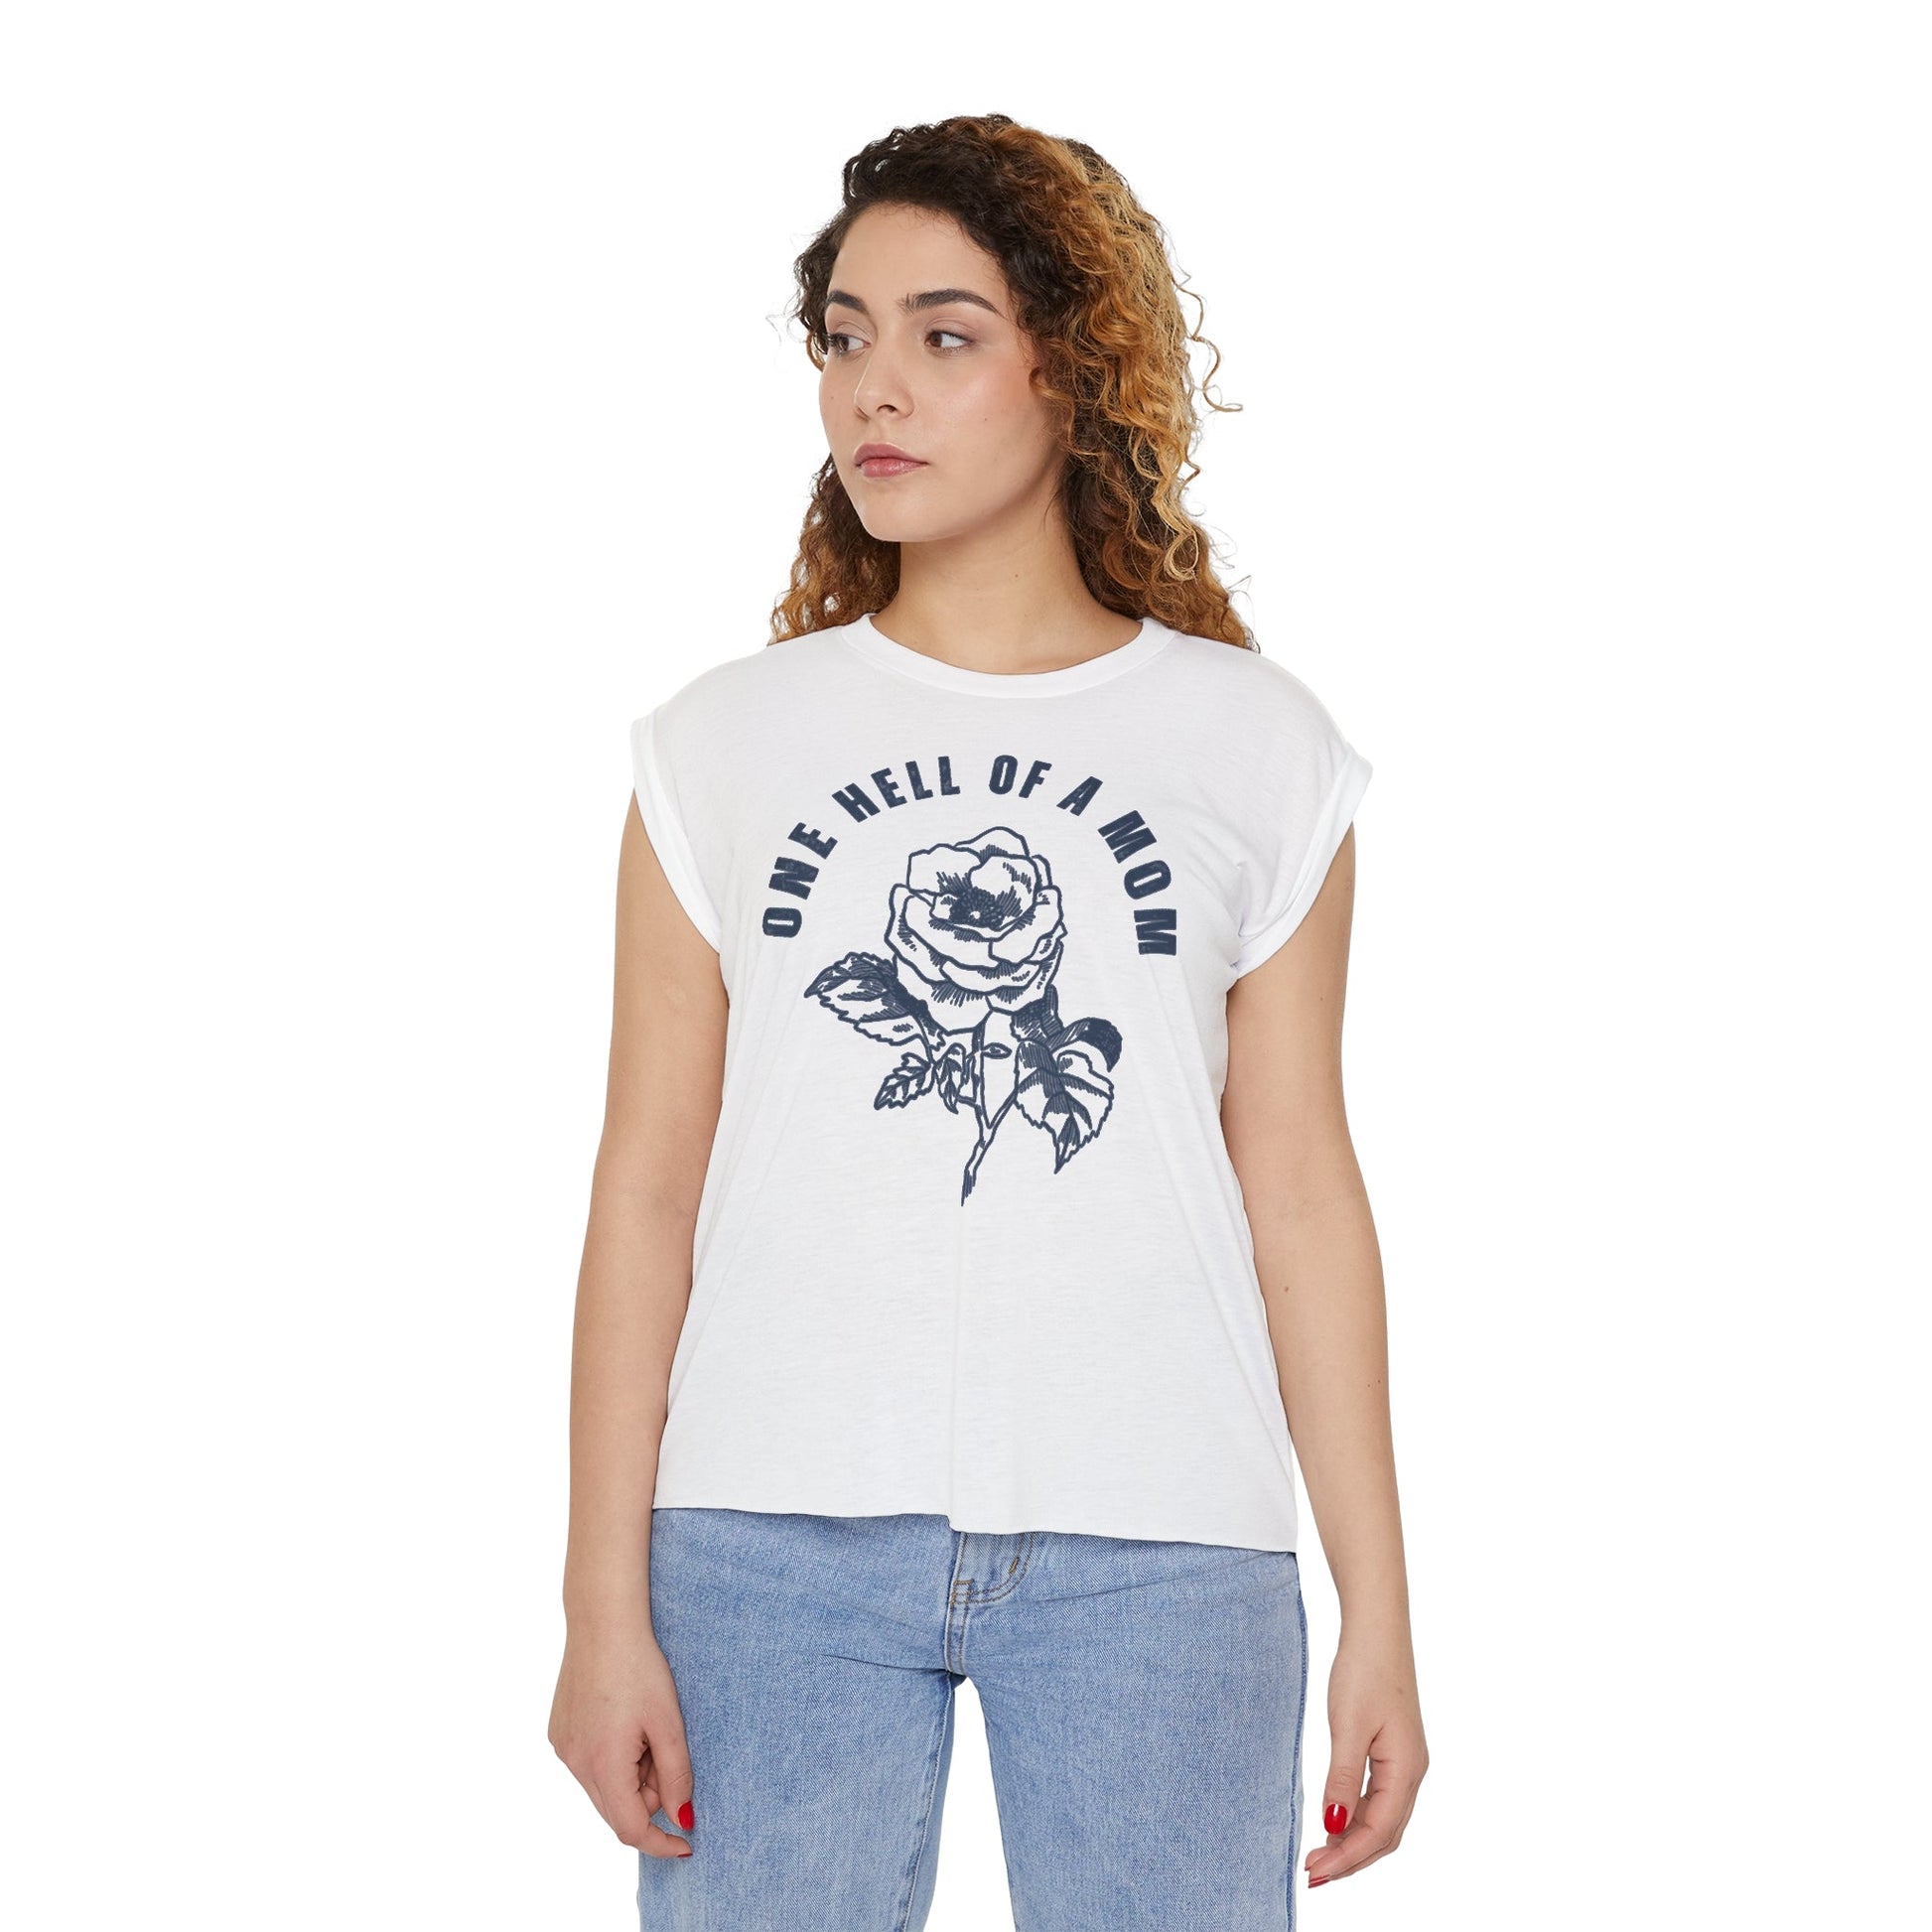 One Hell of a Mom Women’s Flowy Rolled Cuffs Muscle Tee